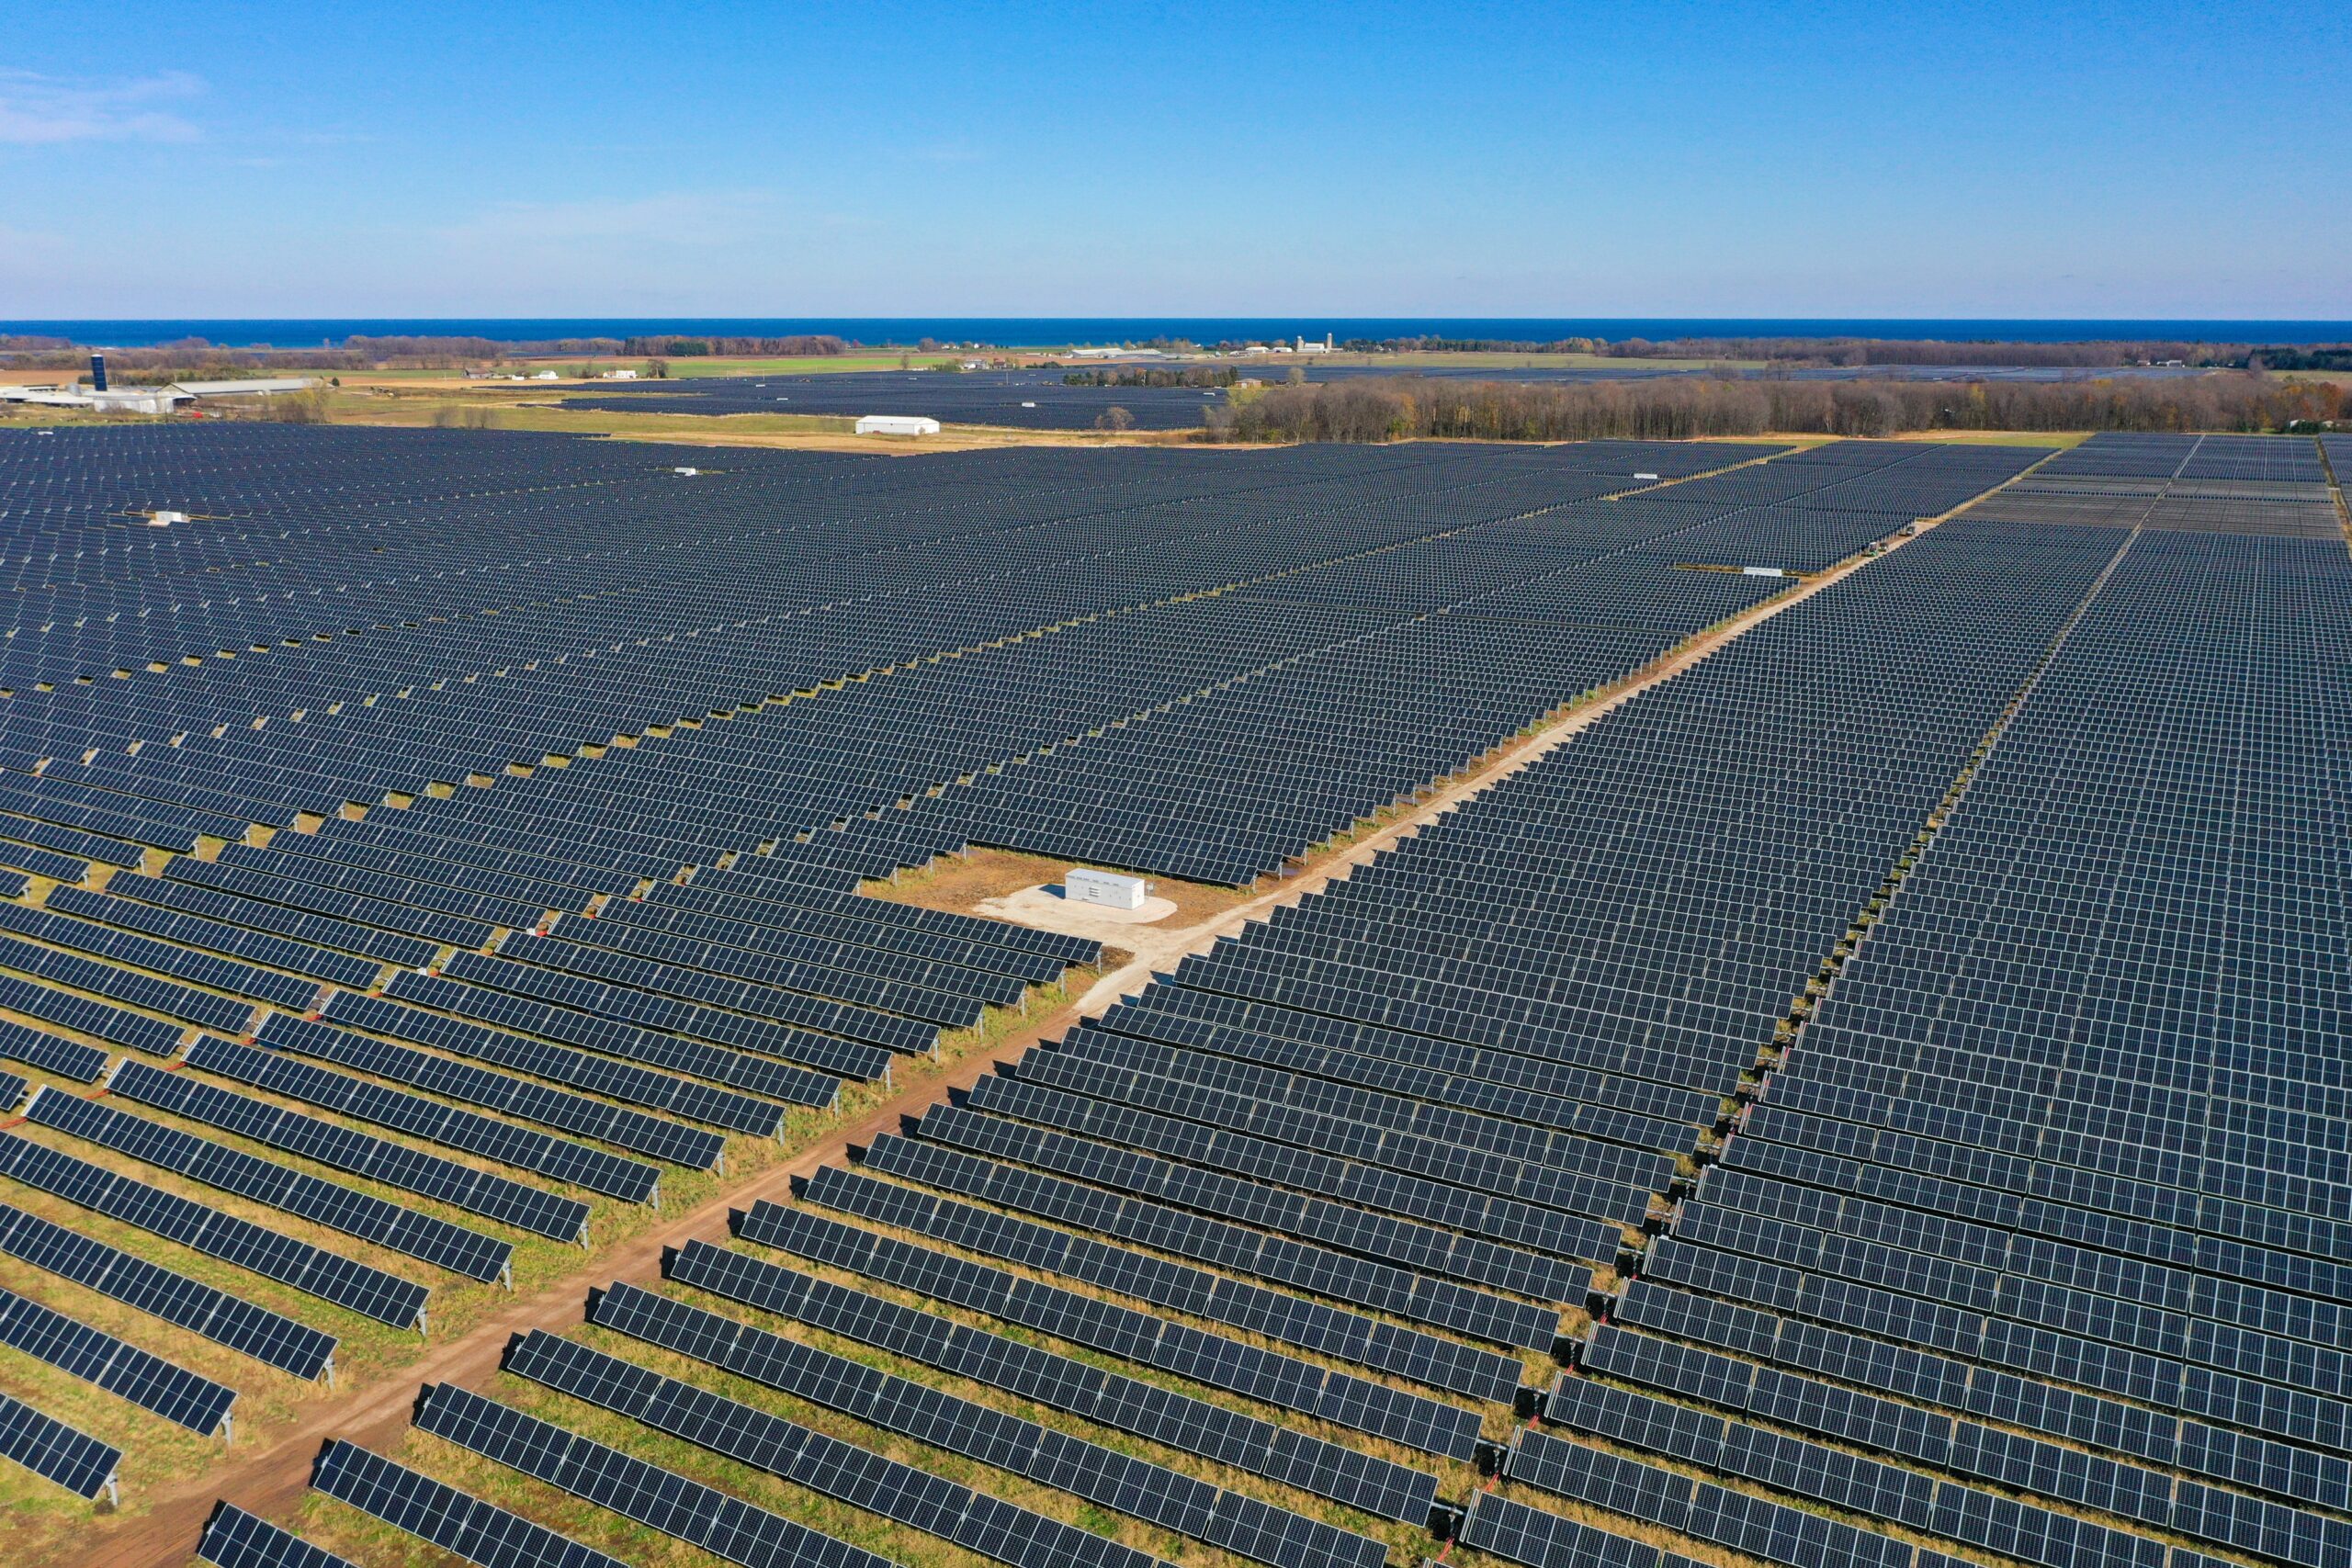 The Two Creeks solar plant in Manitowoc County